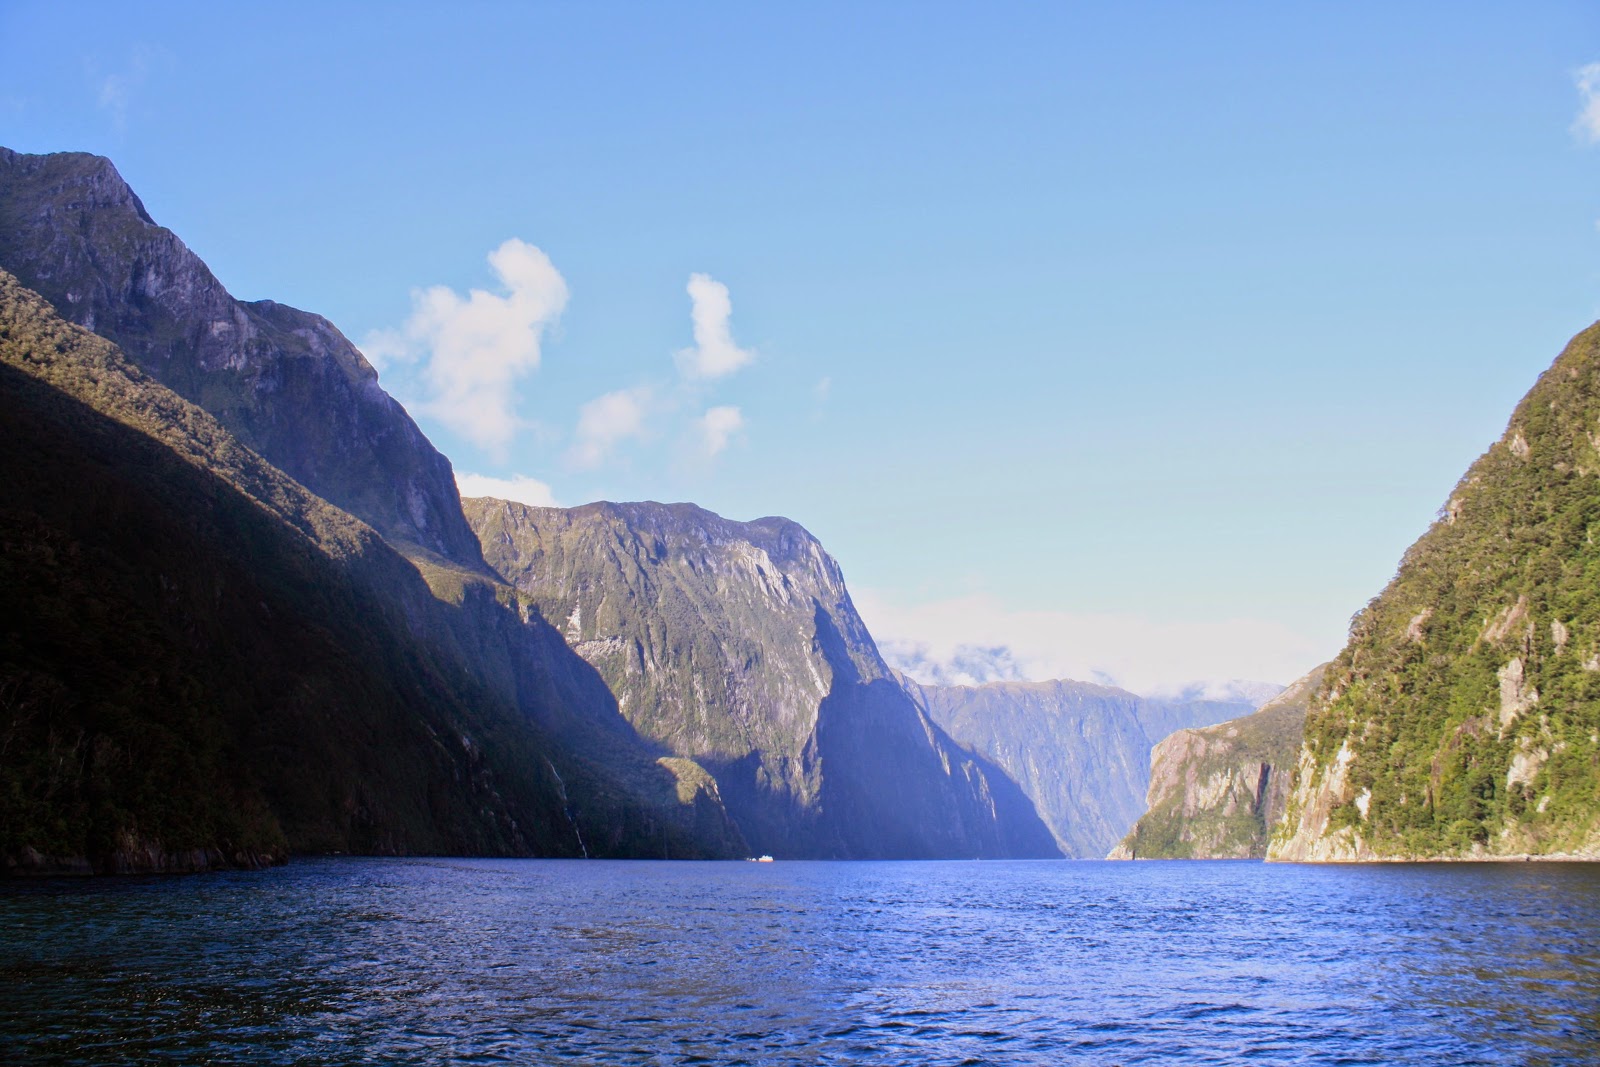 Steep hills carved out by glaciers in Milford Sound.